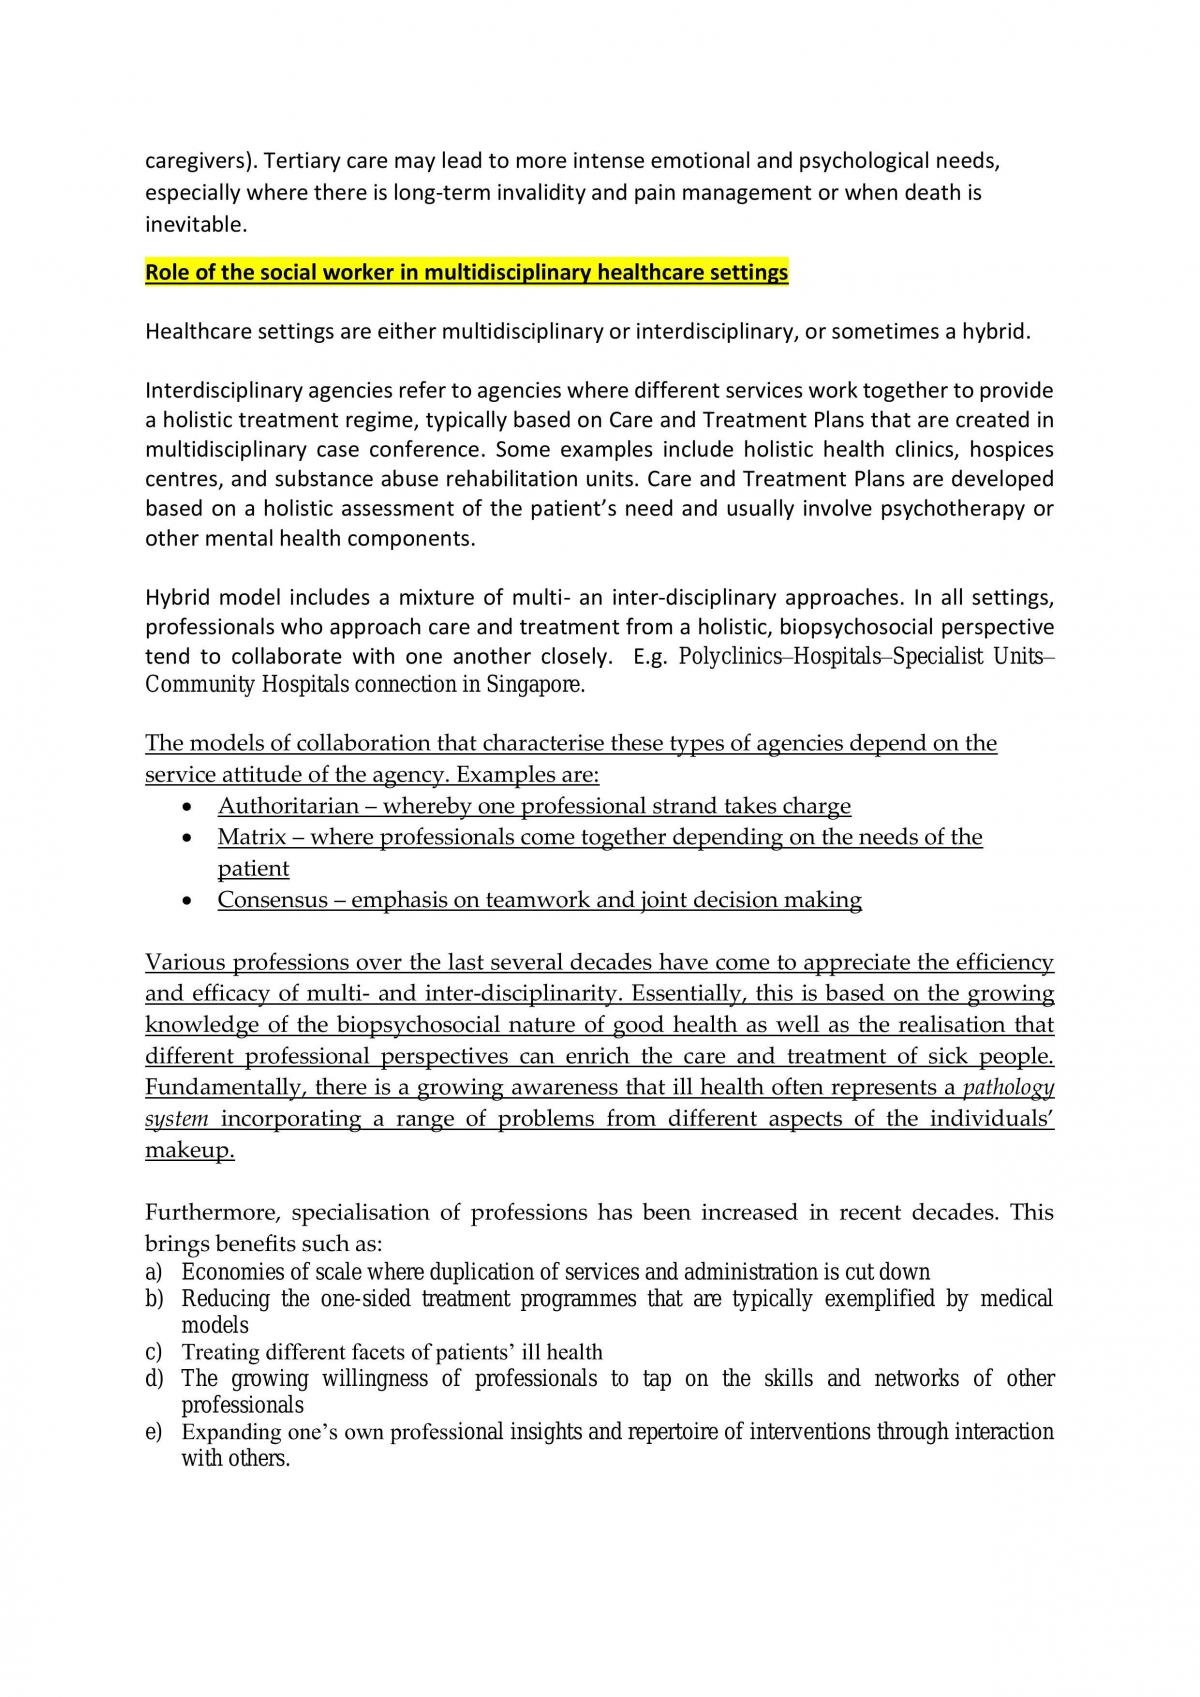 SWK356 Social Work in Healthcare Exam Notes - Page 22